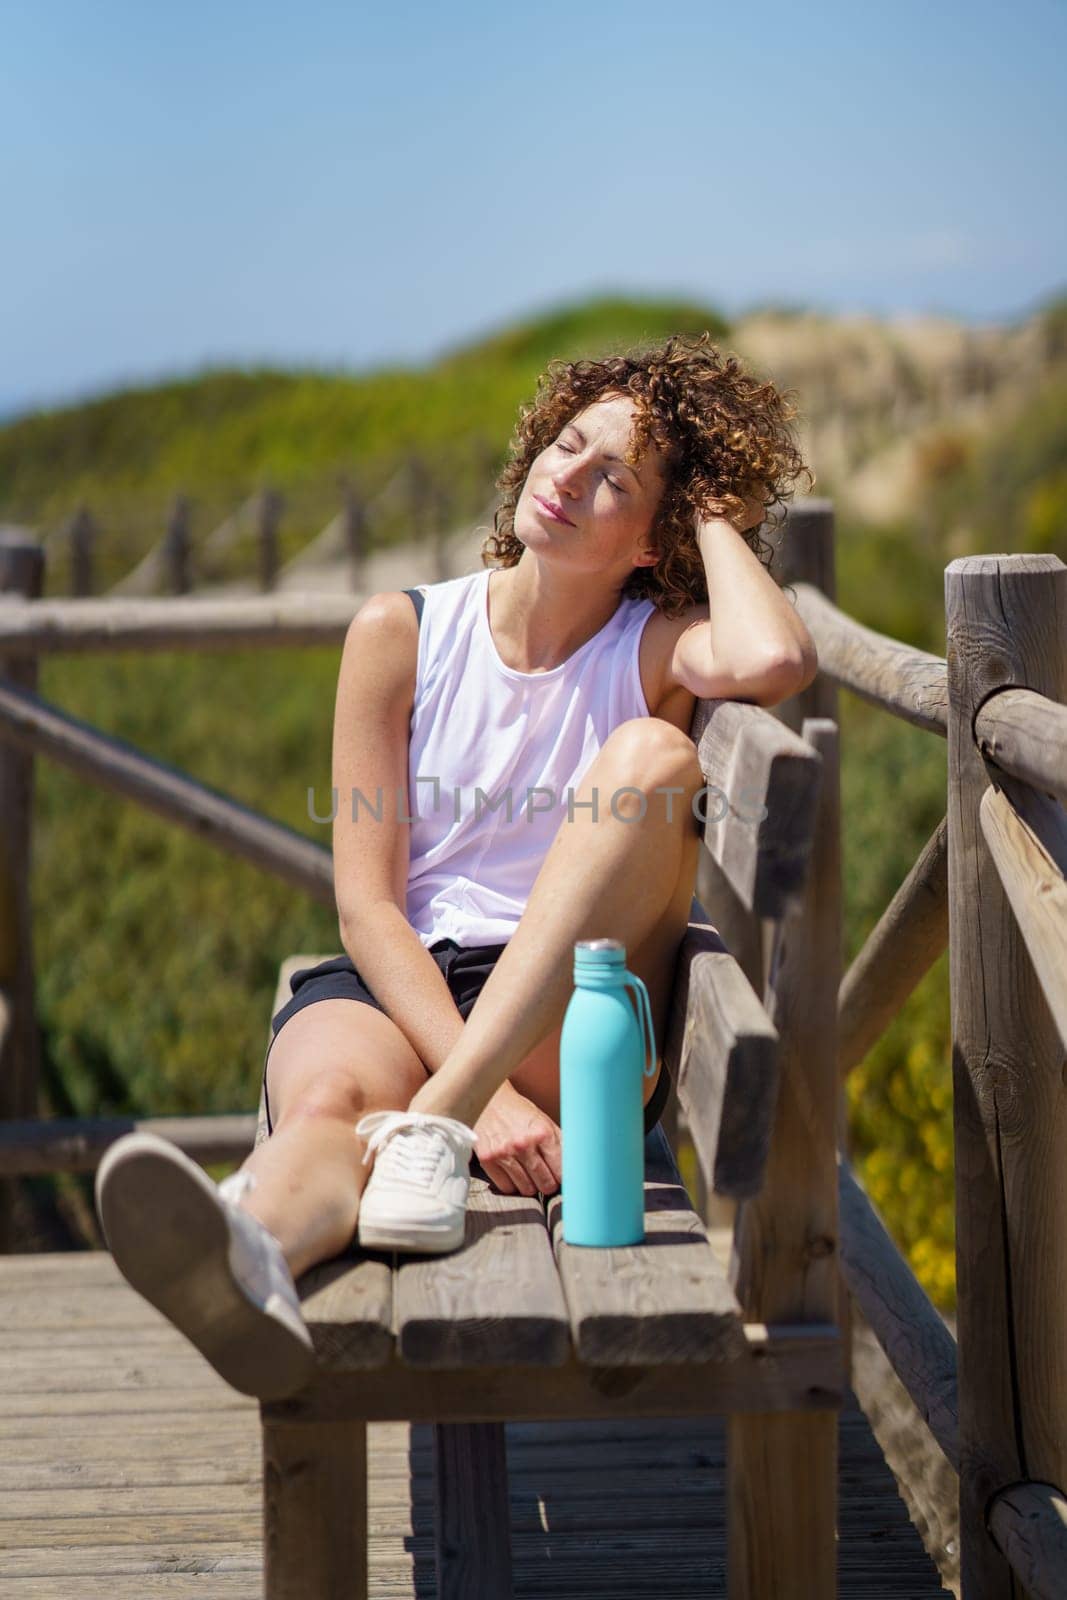 Happy young woman resting on wooden bench in sunlight by javiindy